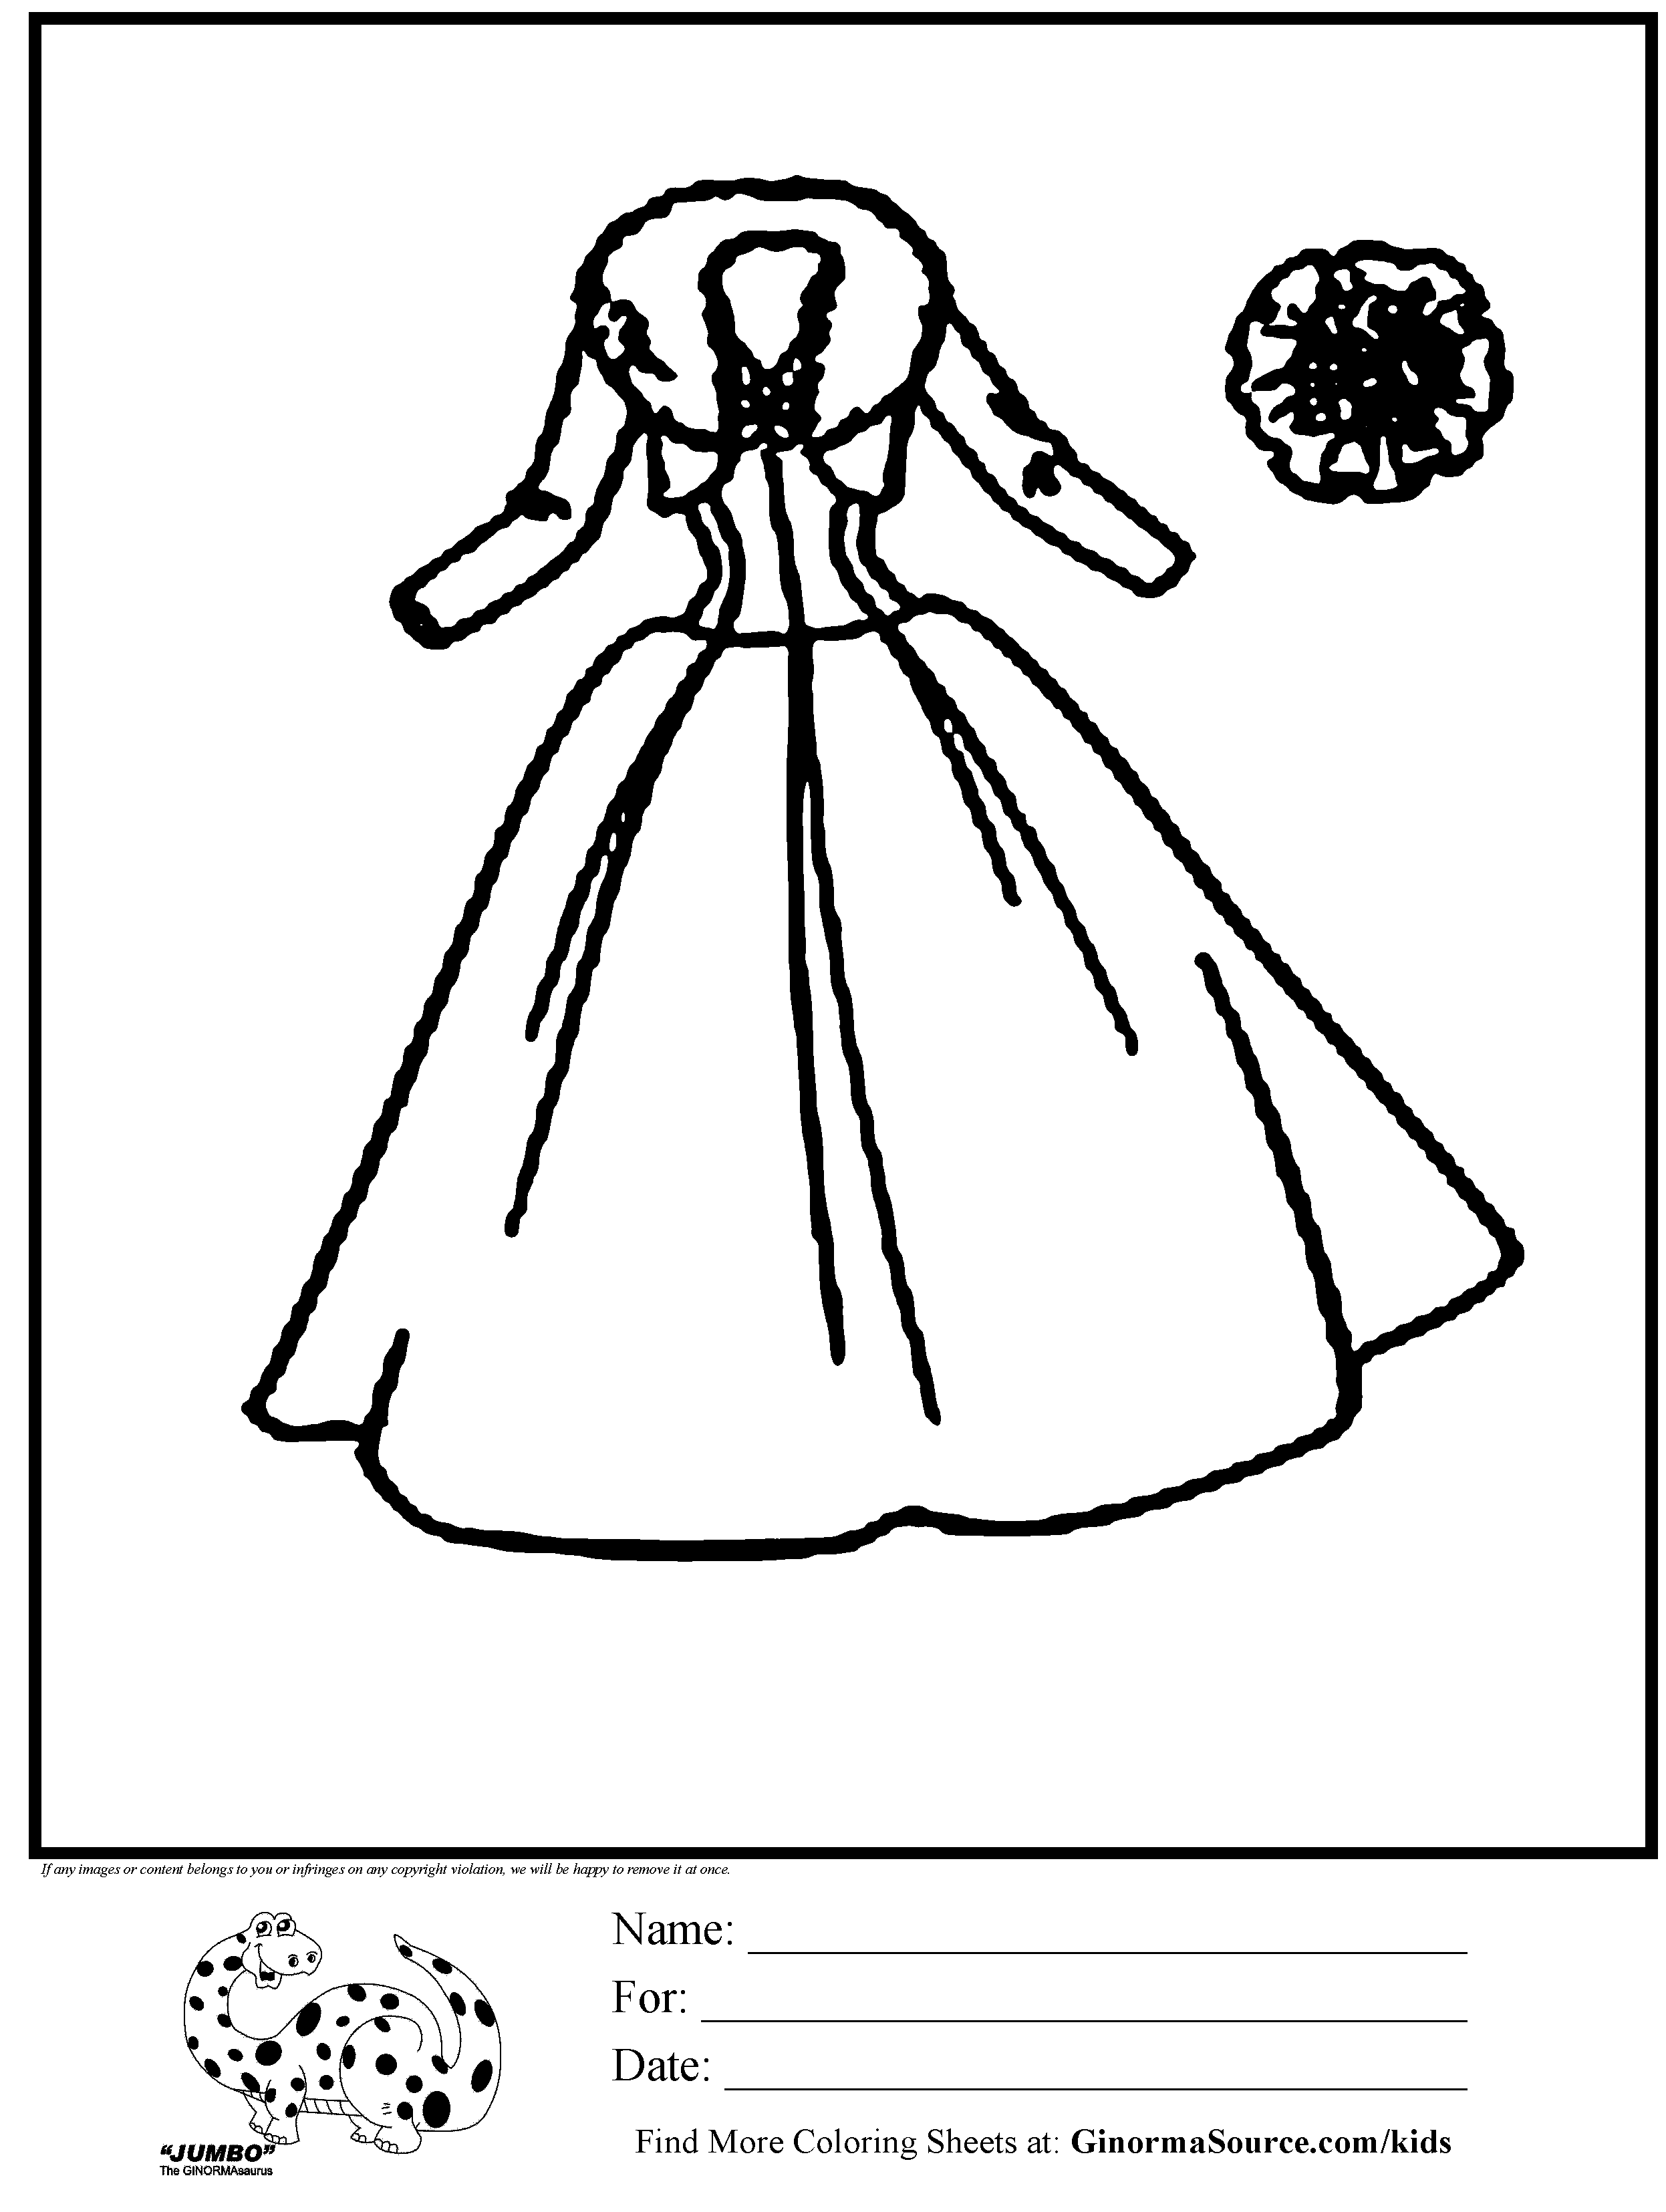 Abstract Dress Coloring Pages - Coloring Pages For All Ages